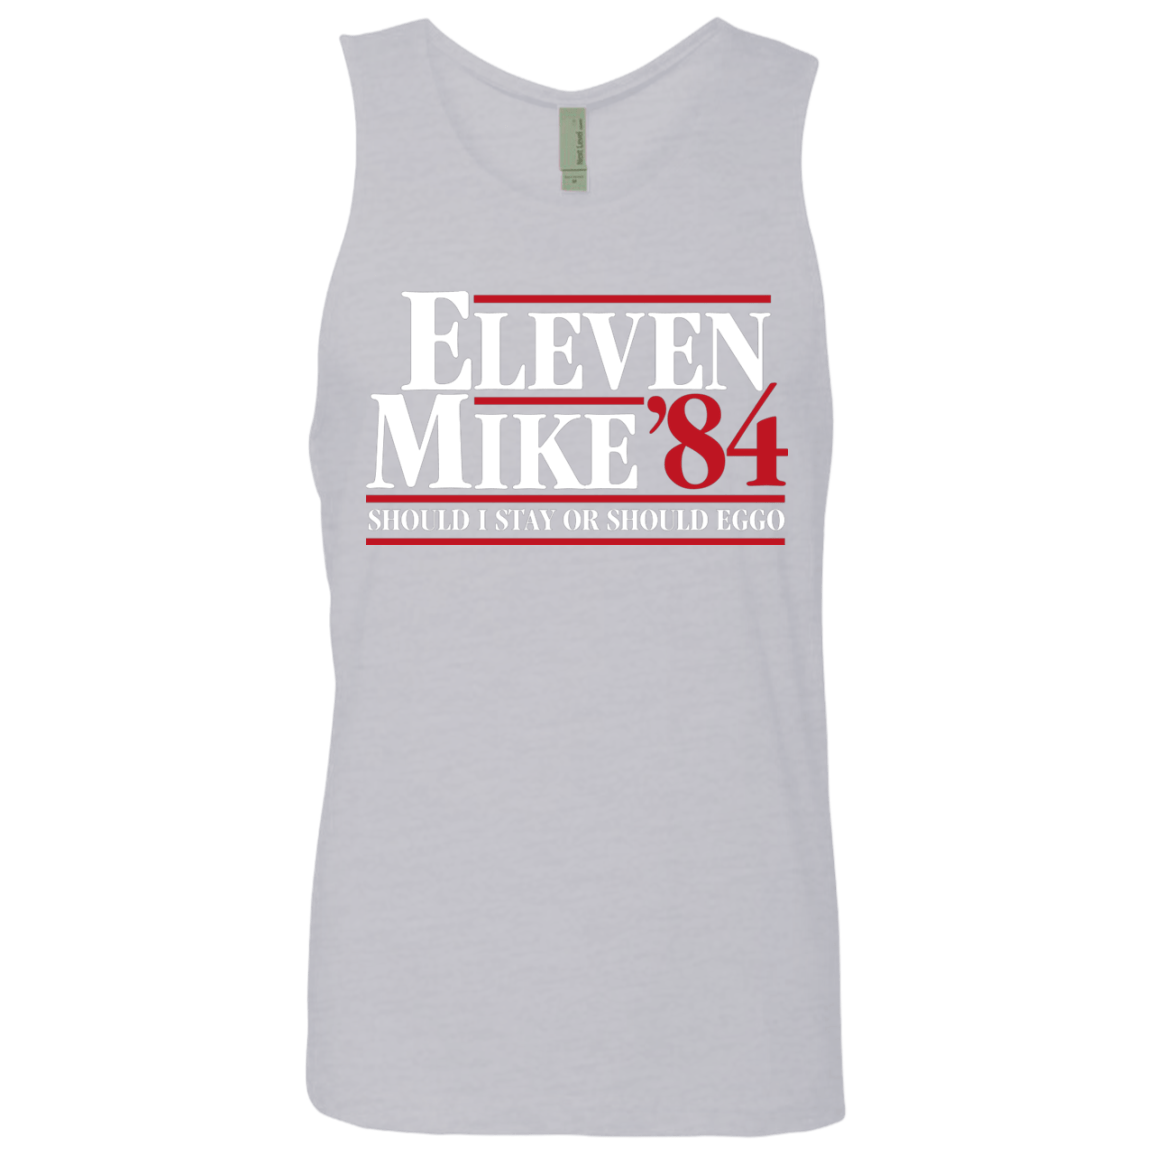 T-Shirts Heather Grey / Small Eleven Mike 84 - Should I Stay or Should Eggo Men's Premium Tank Top